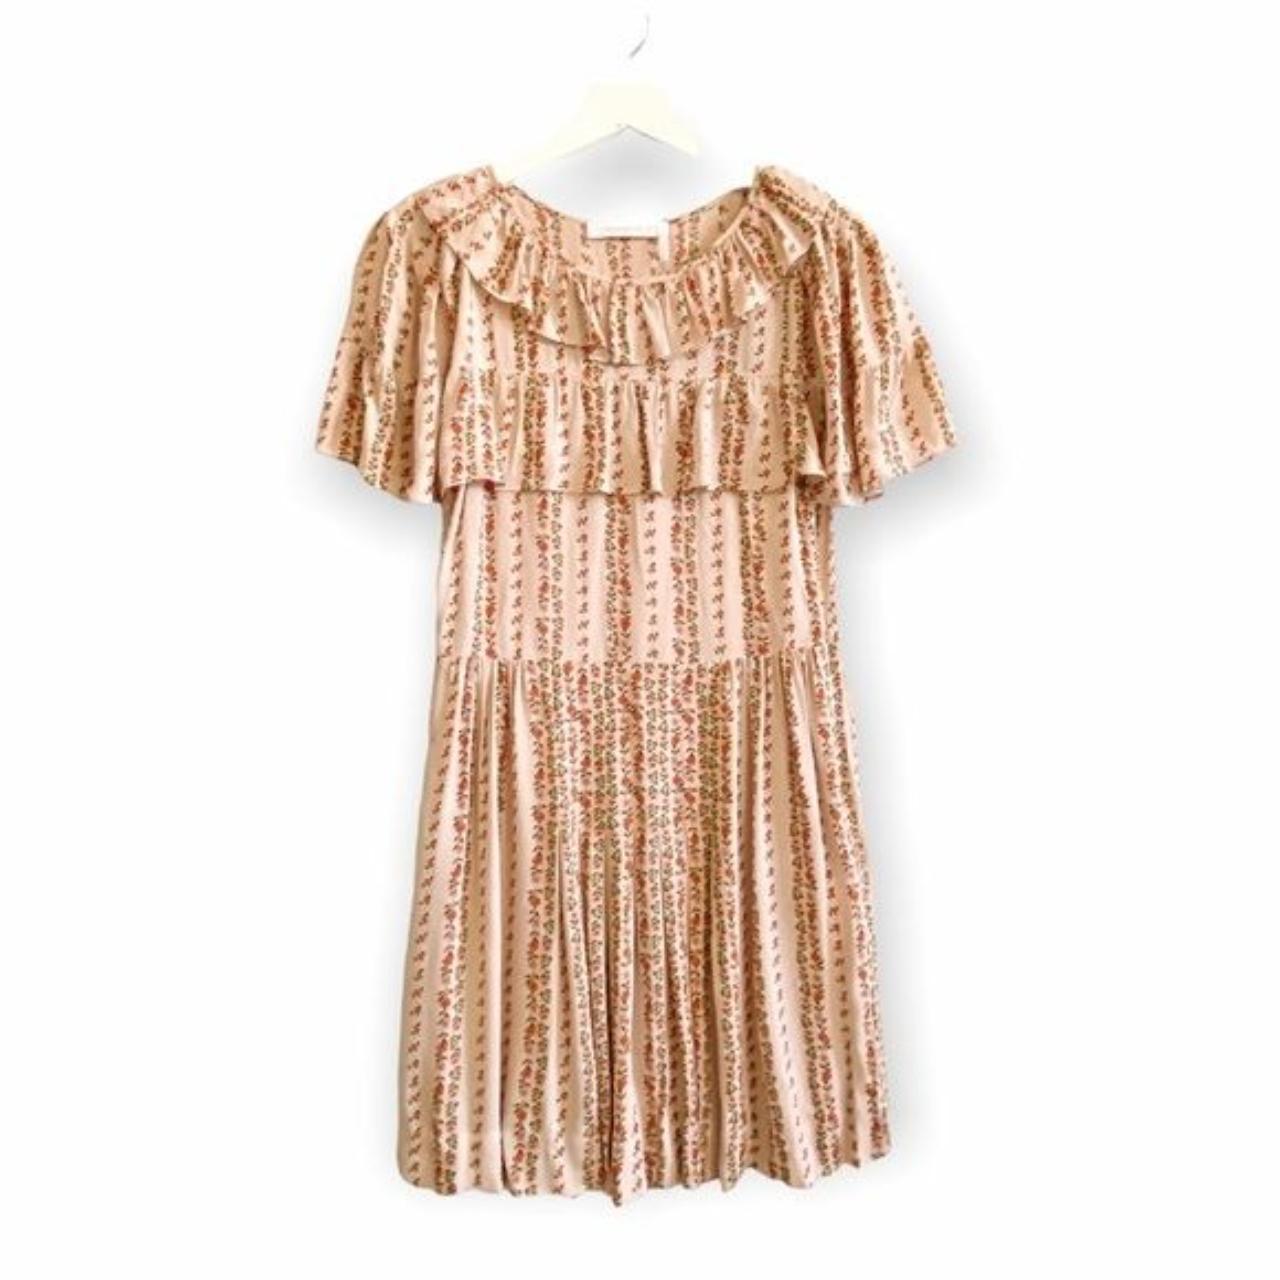 See by Chloé Women's Pink and Cream Dress